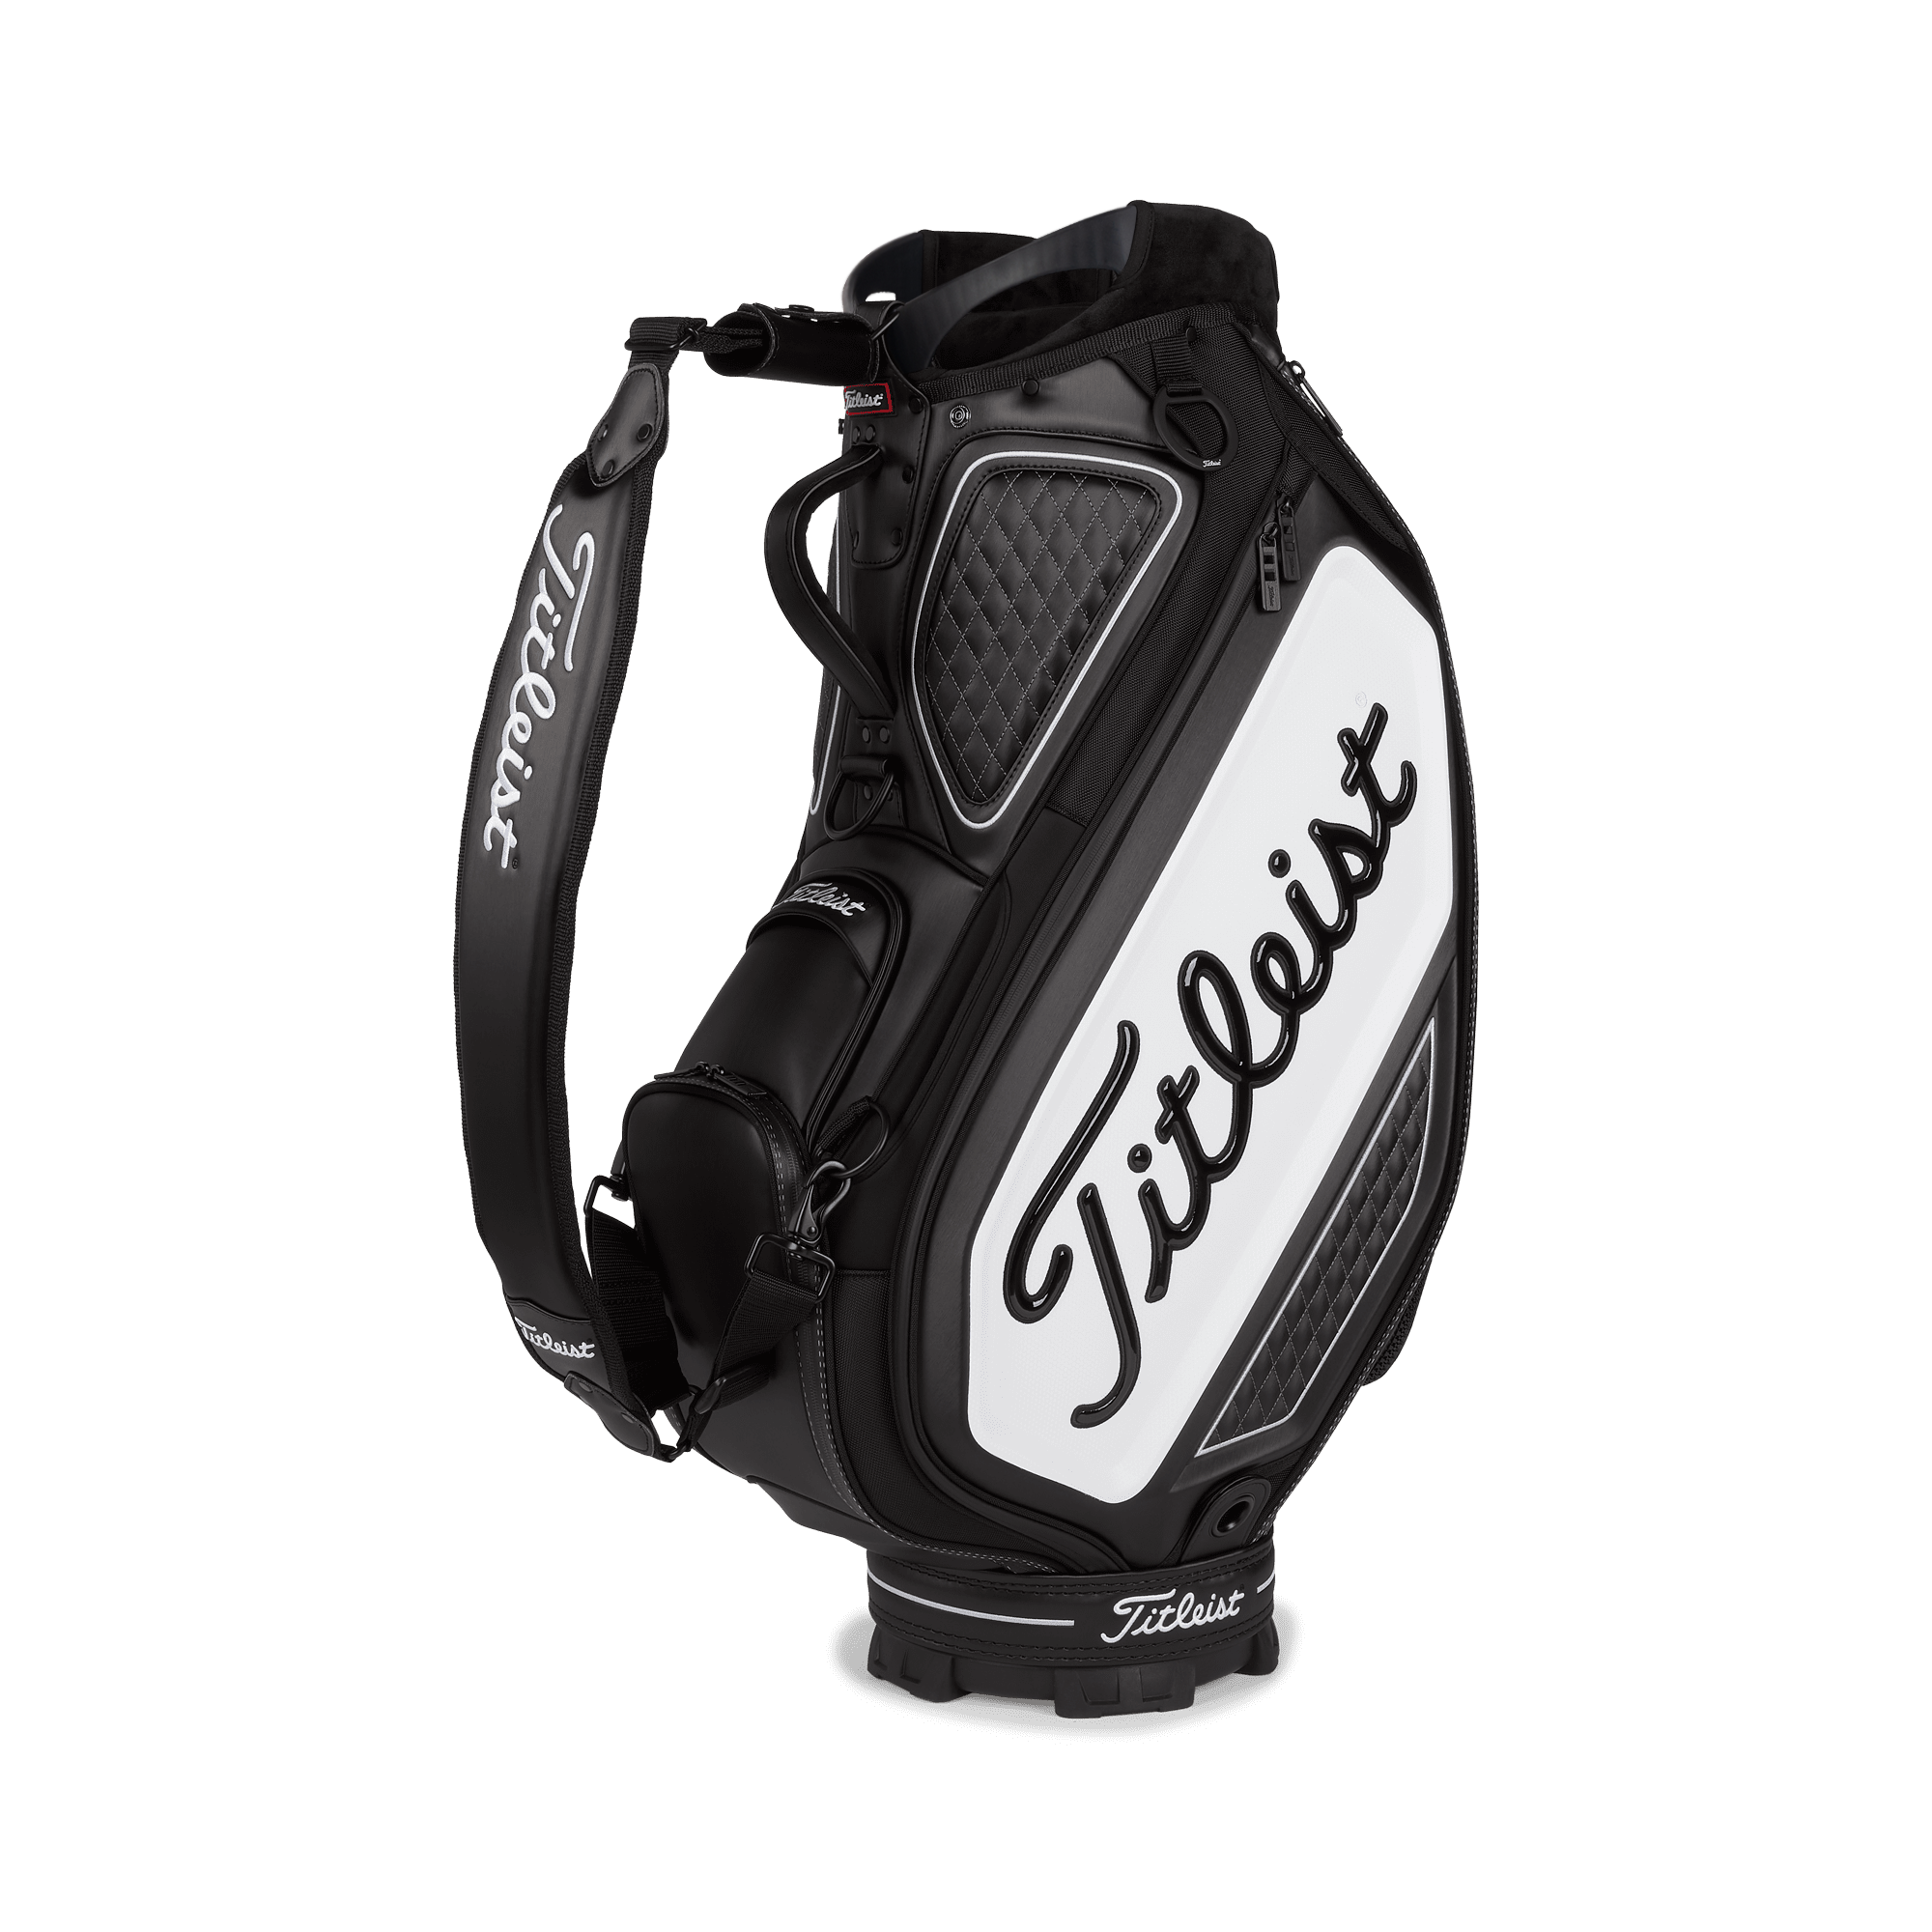 Titleist Official Tour Golf Bag Golf Golf Bag in Black and White